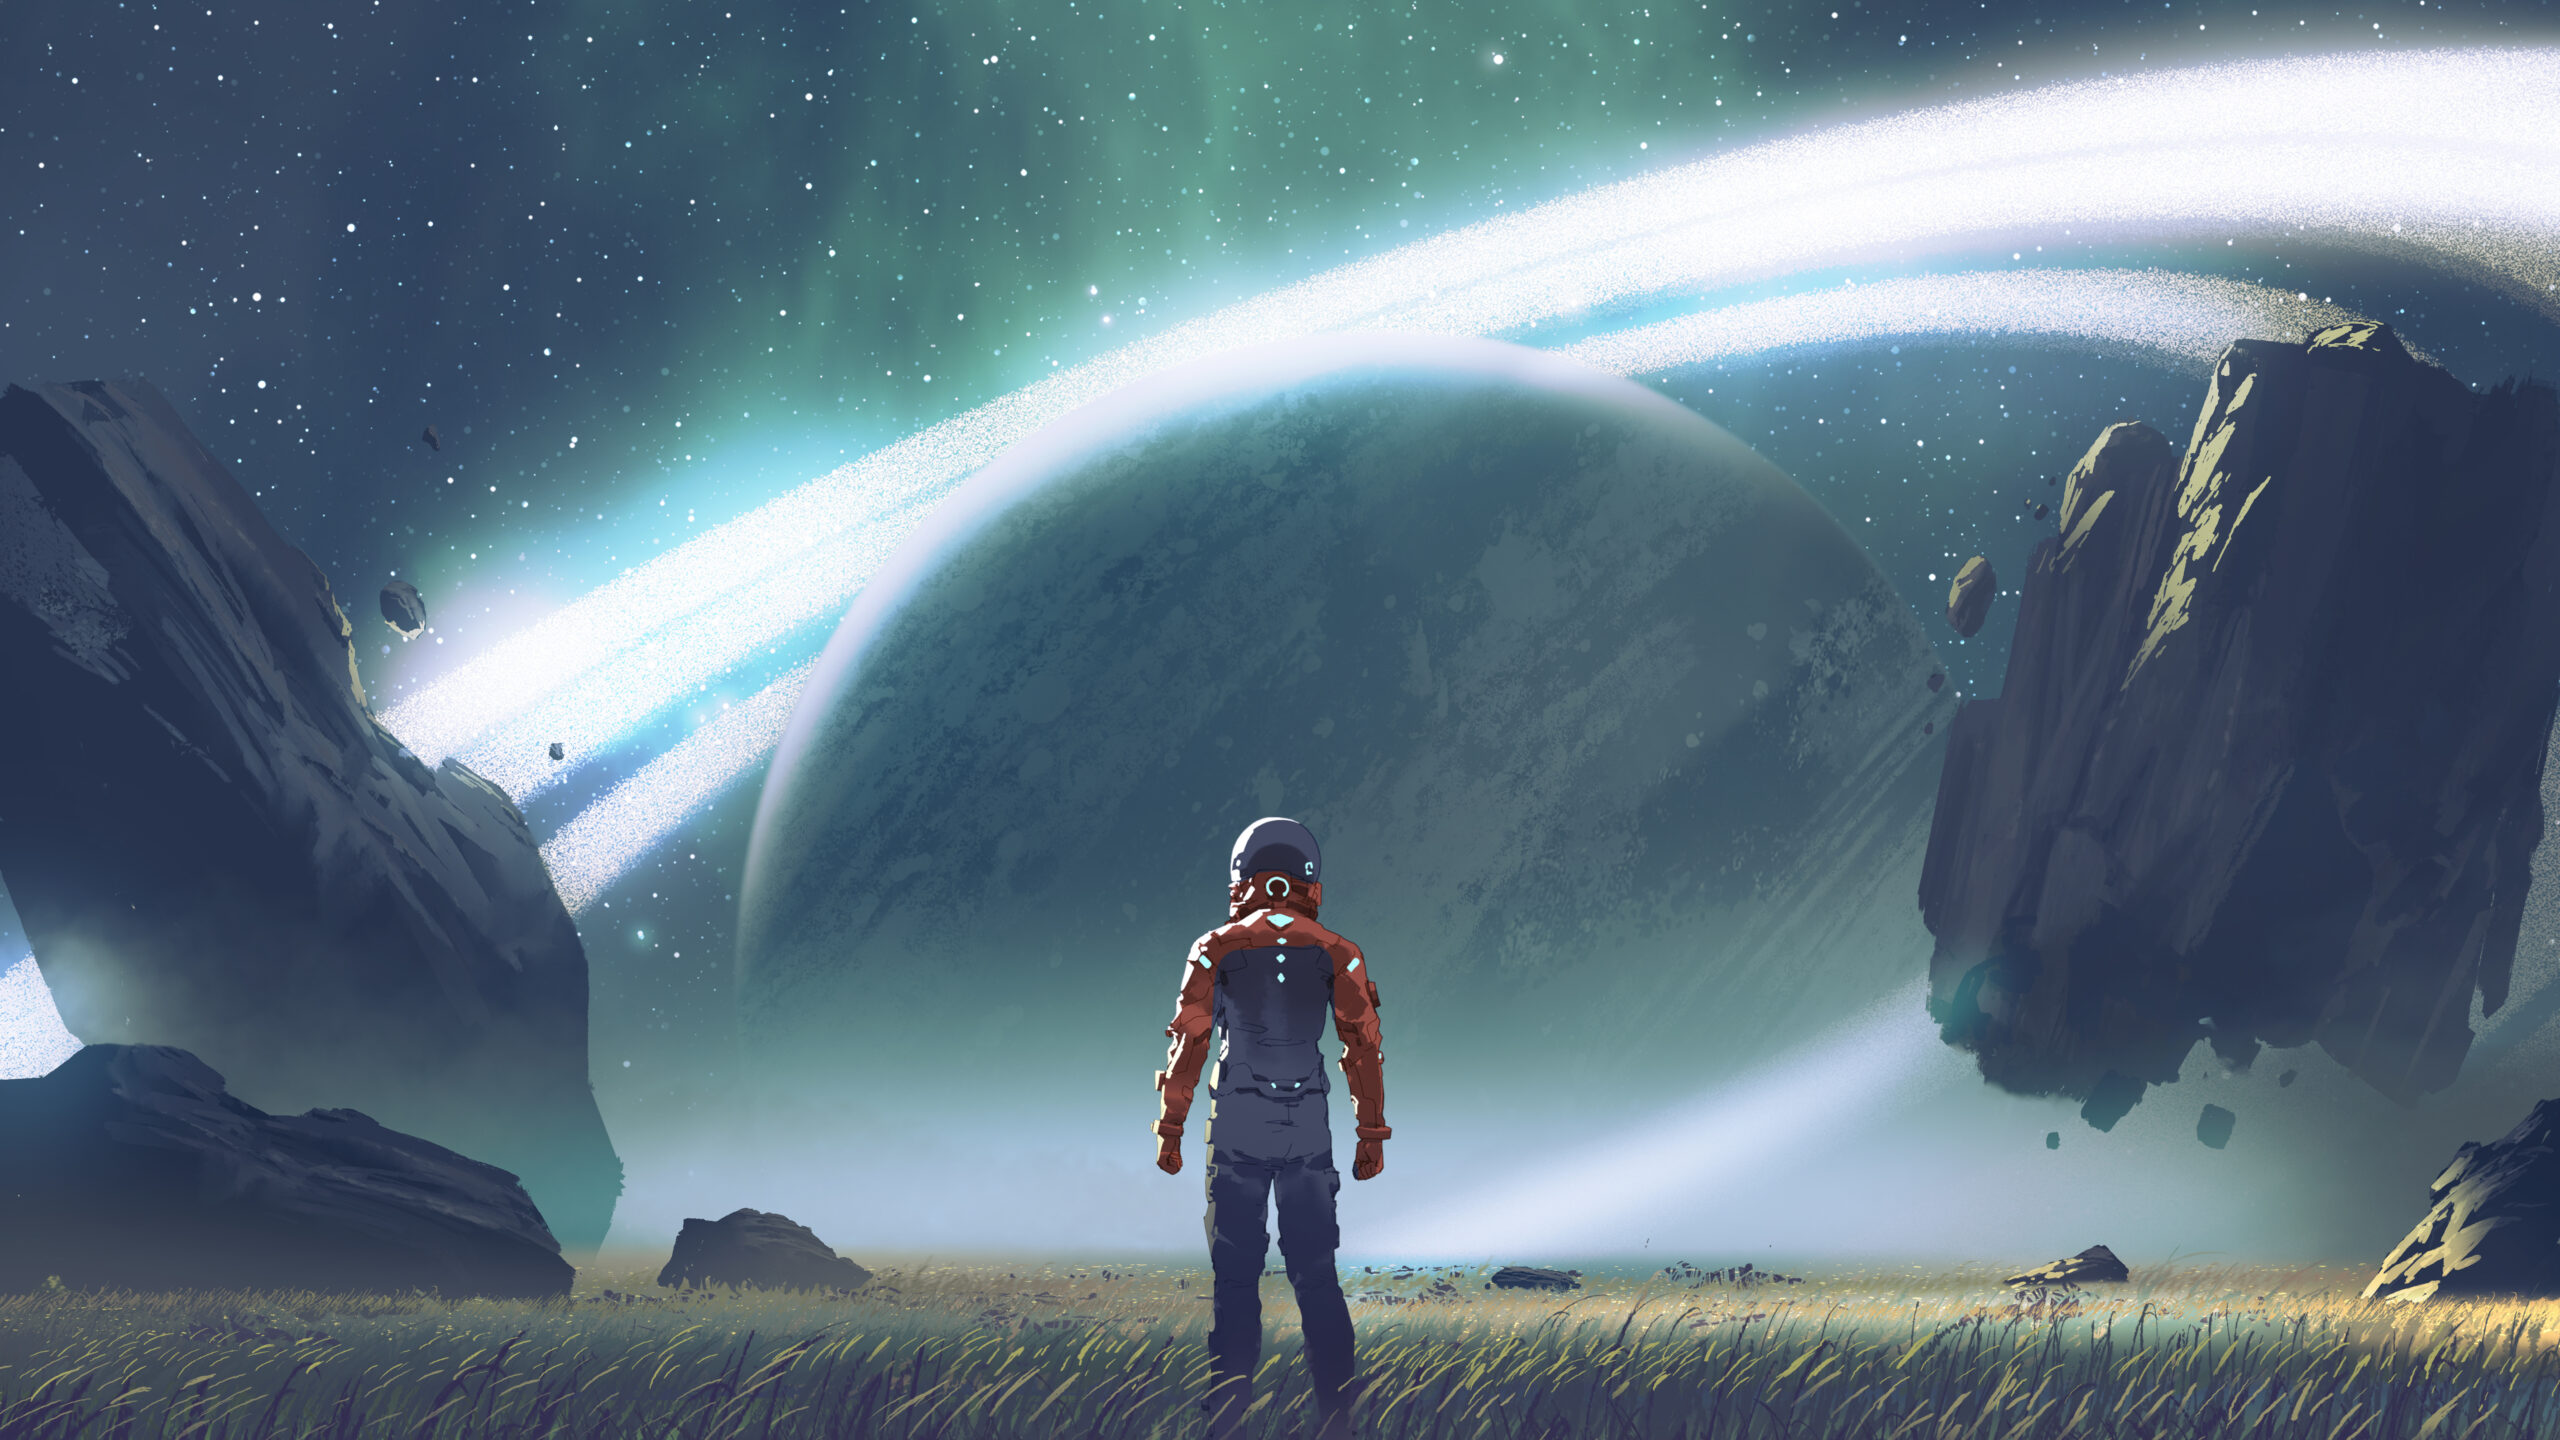 An illustration showing a futuristic astronaut standing in a low profile field. They are gazing up at the gigantic gas planet that is just above the atmosphere, which is joined by 2 floating astroids.